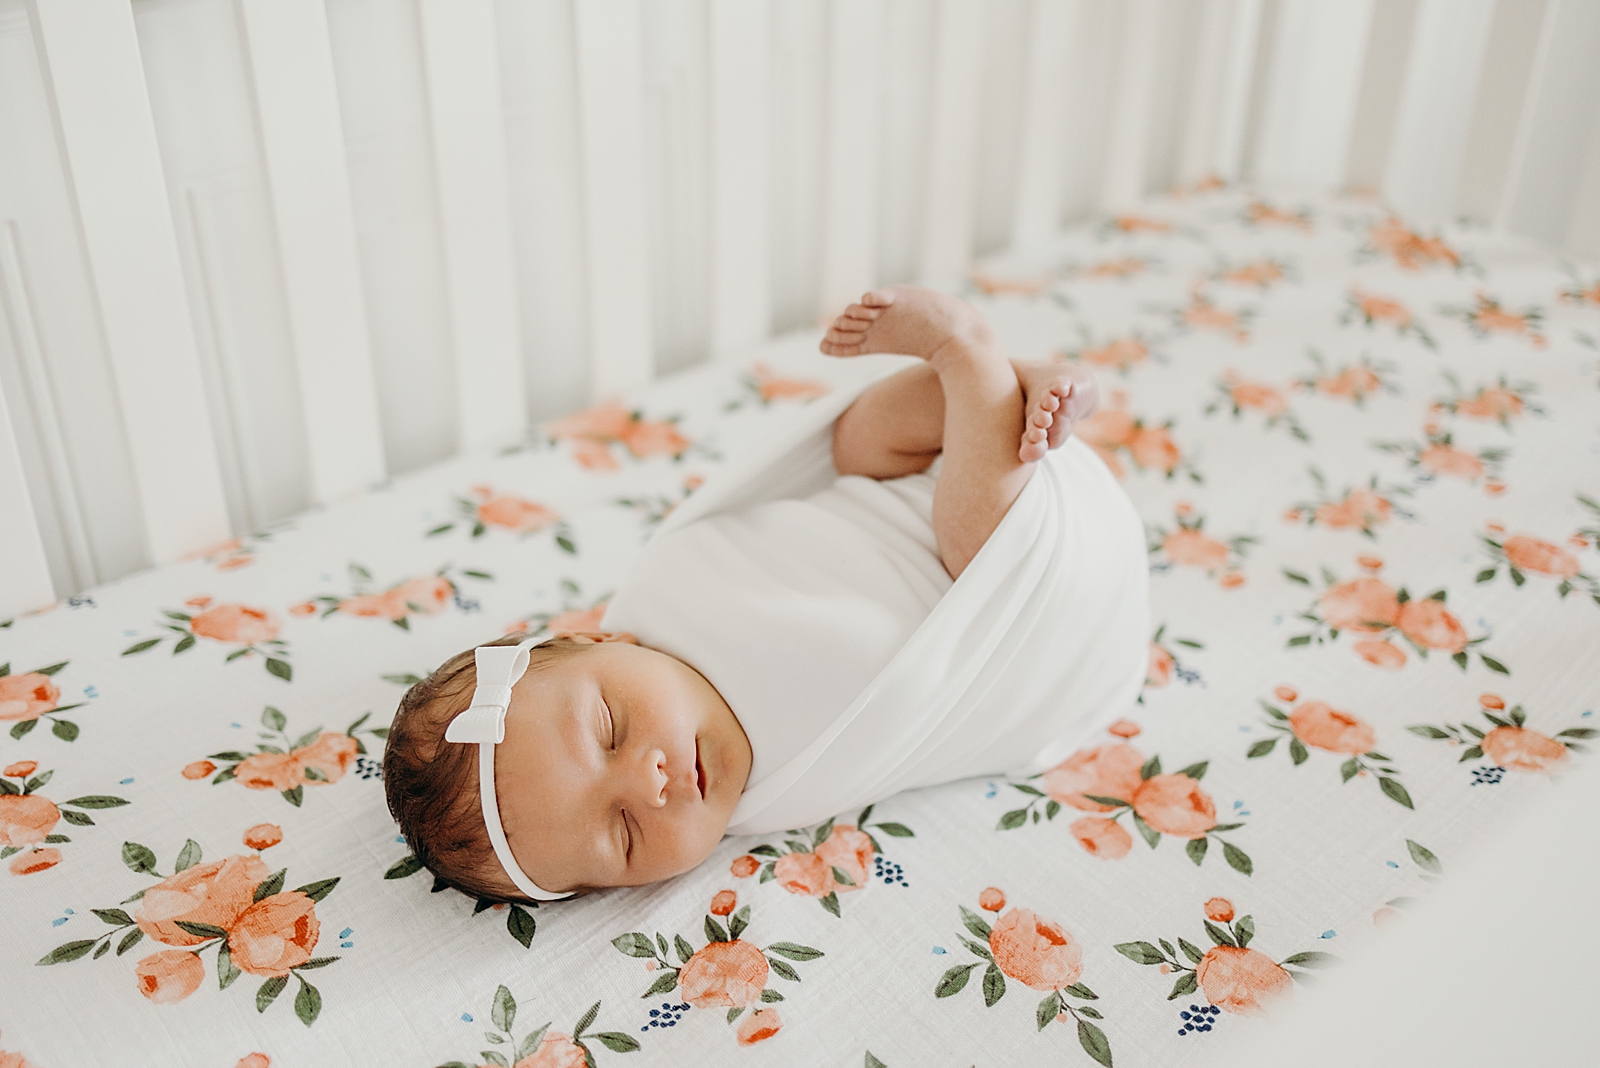 Baby sleeping peacefully on floral mattress in the crib South Florida Newborn Photography Photography captured by South Florida Family Photographer Maggie Alvarez Photography